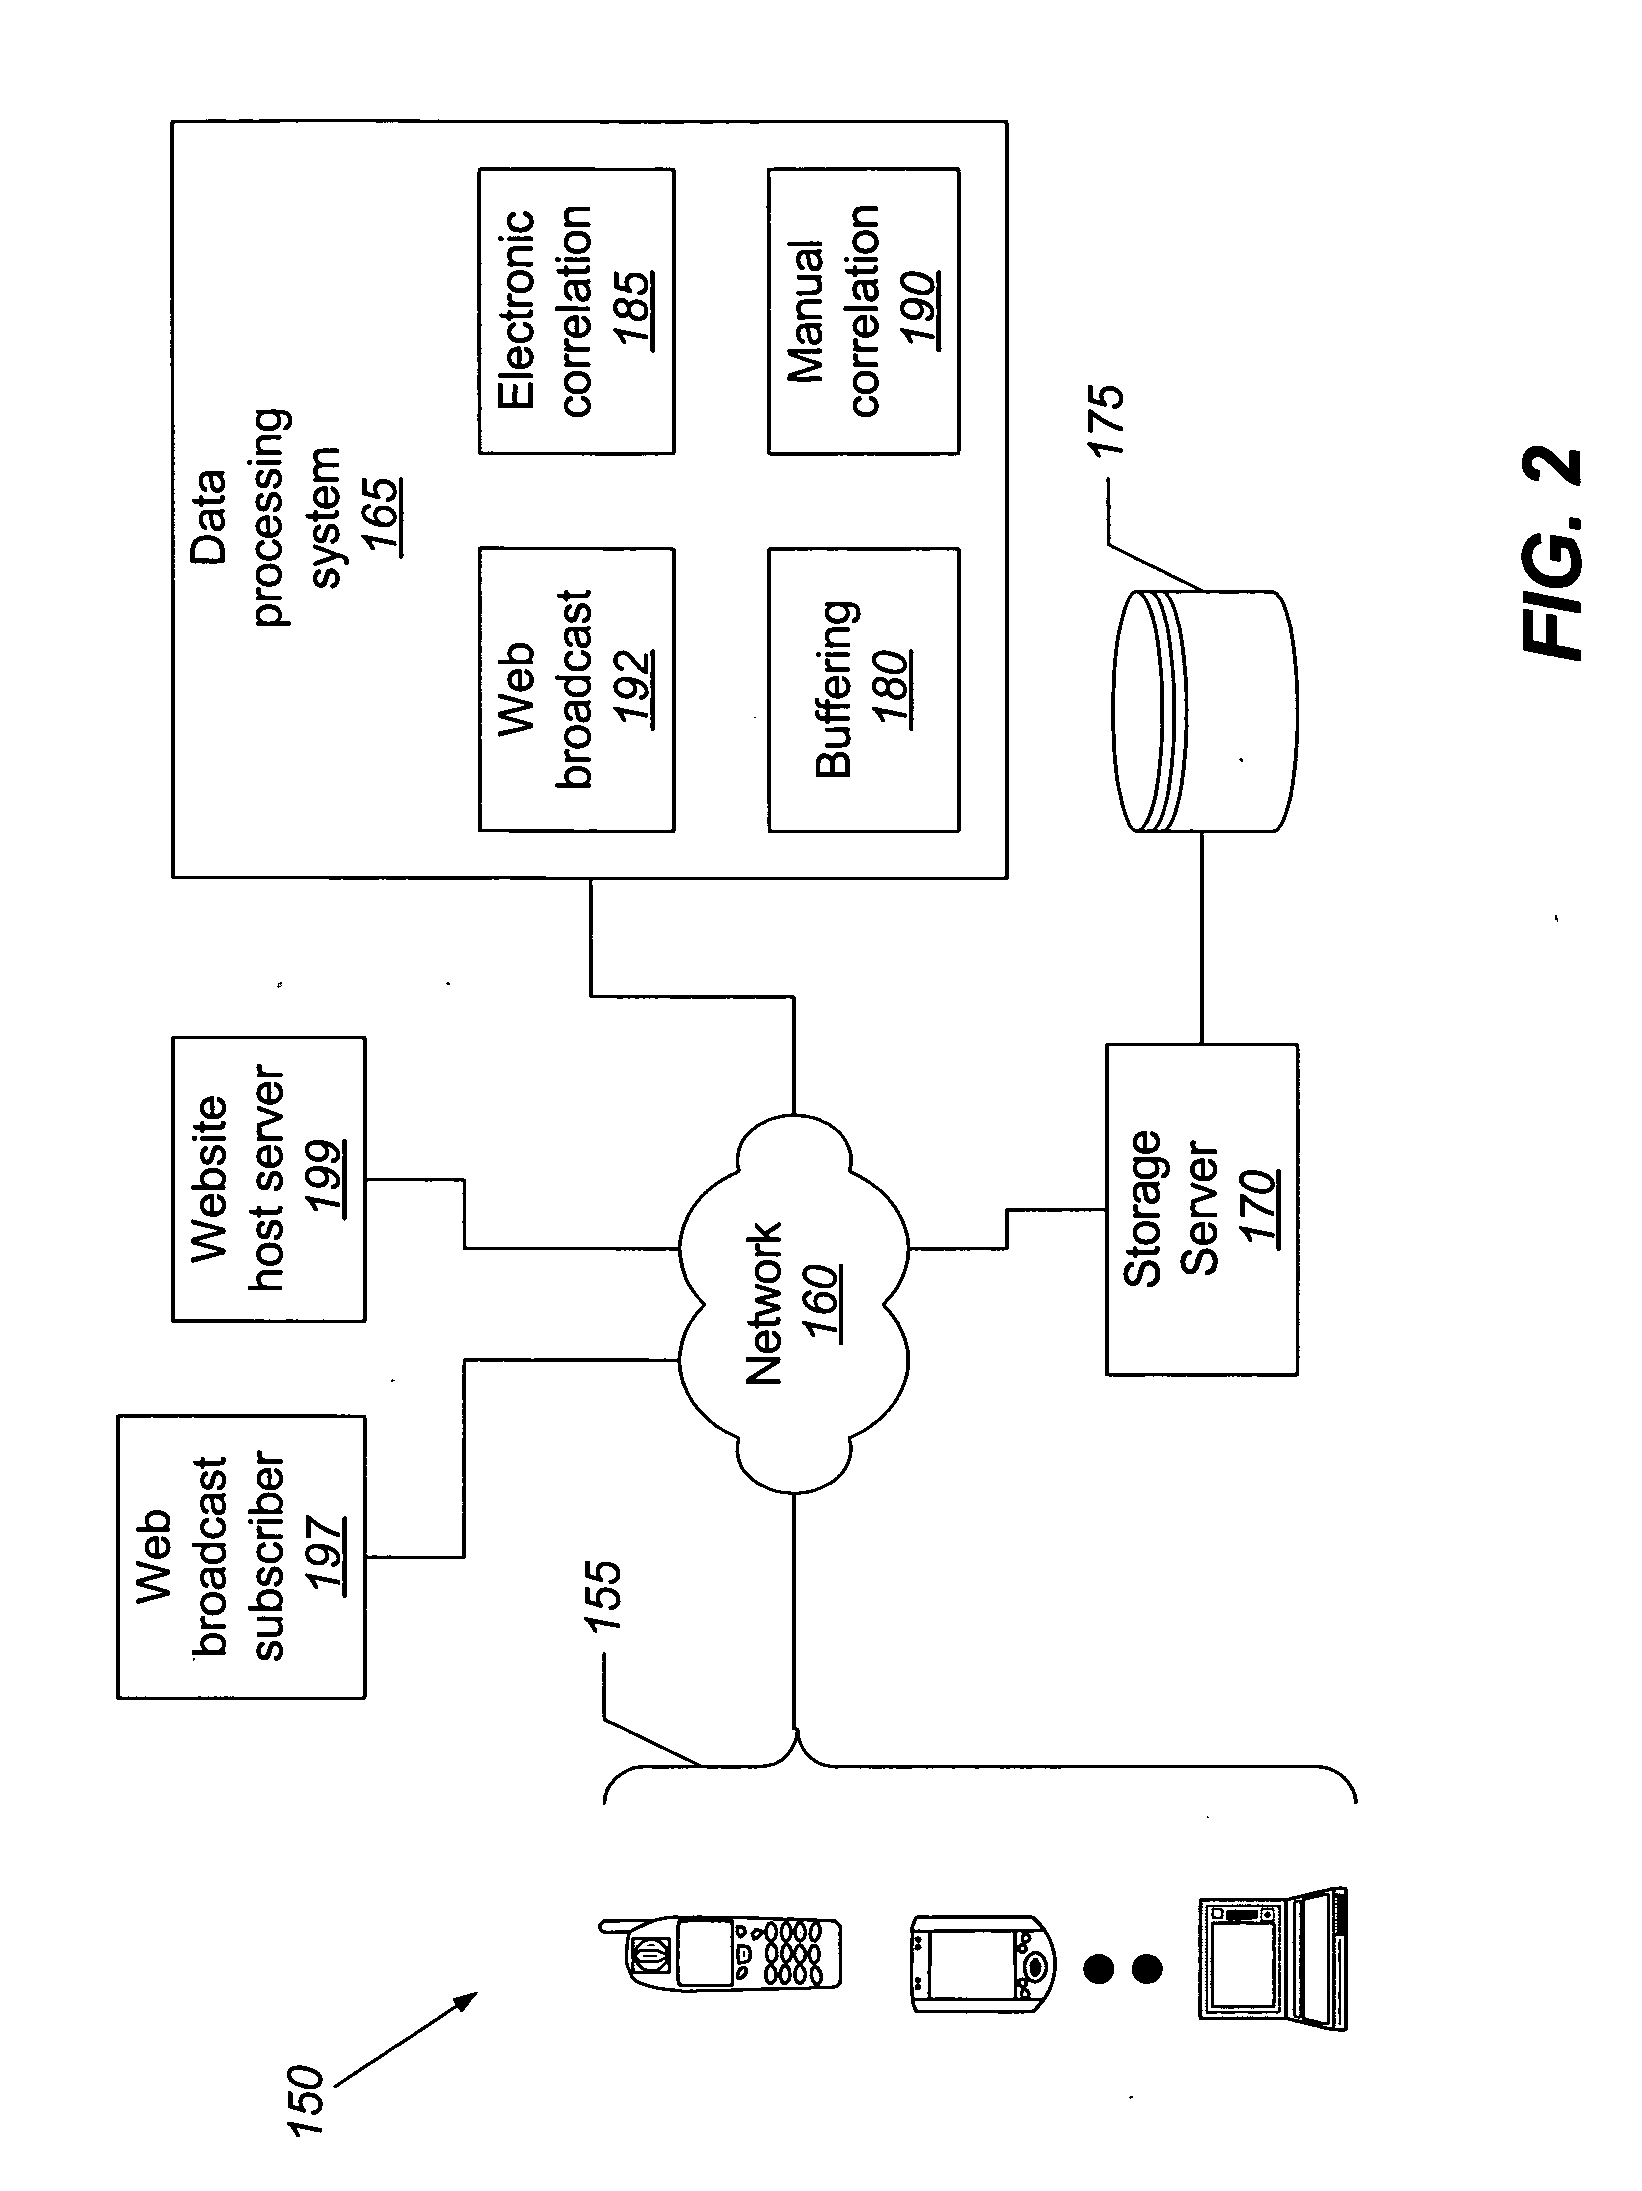 Methods, systems, and computer program products for managing audio and/or video information via a web broadcast